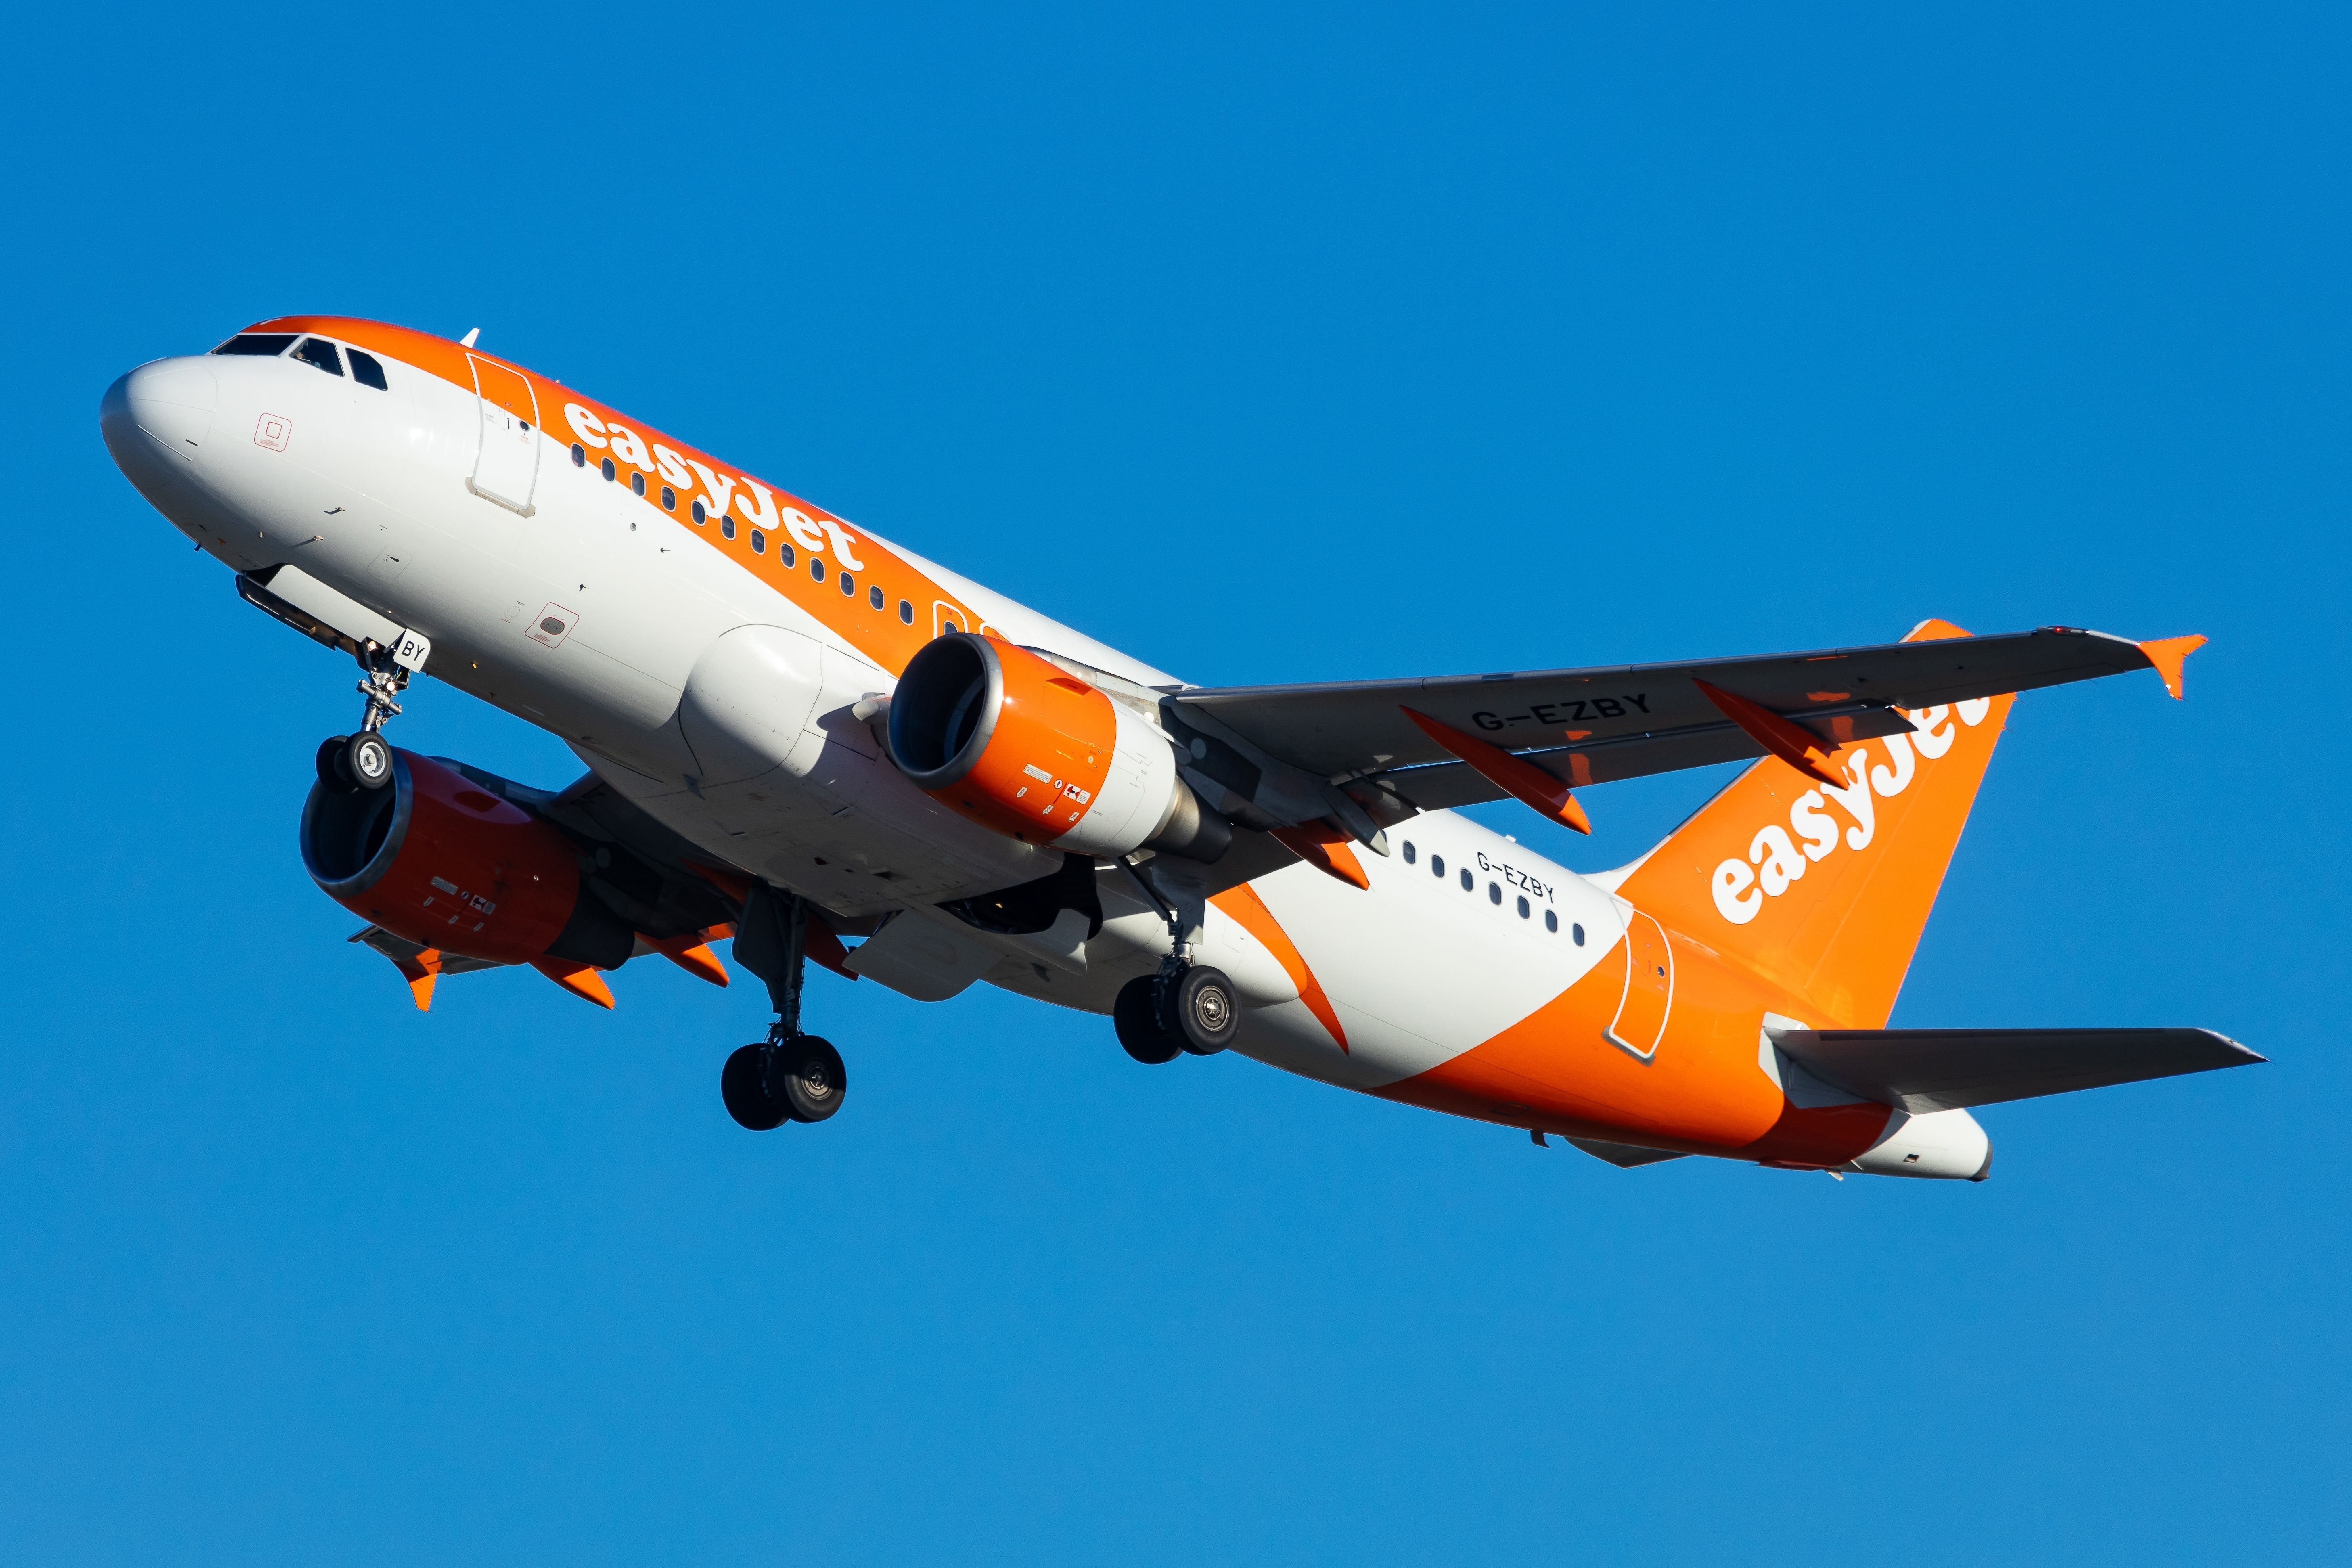 An easyJet Airbus A319 Flying in the sky.